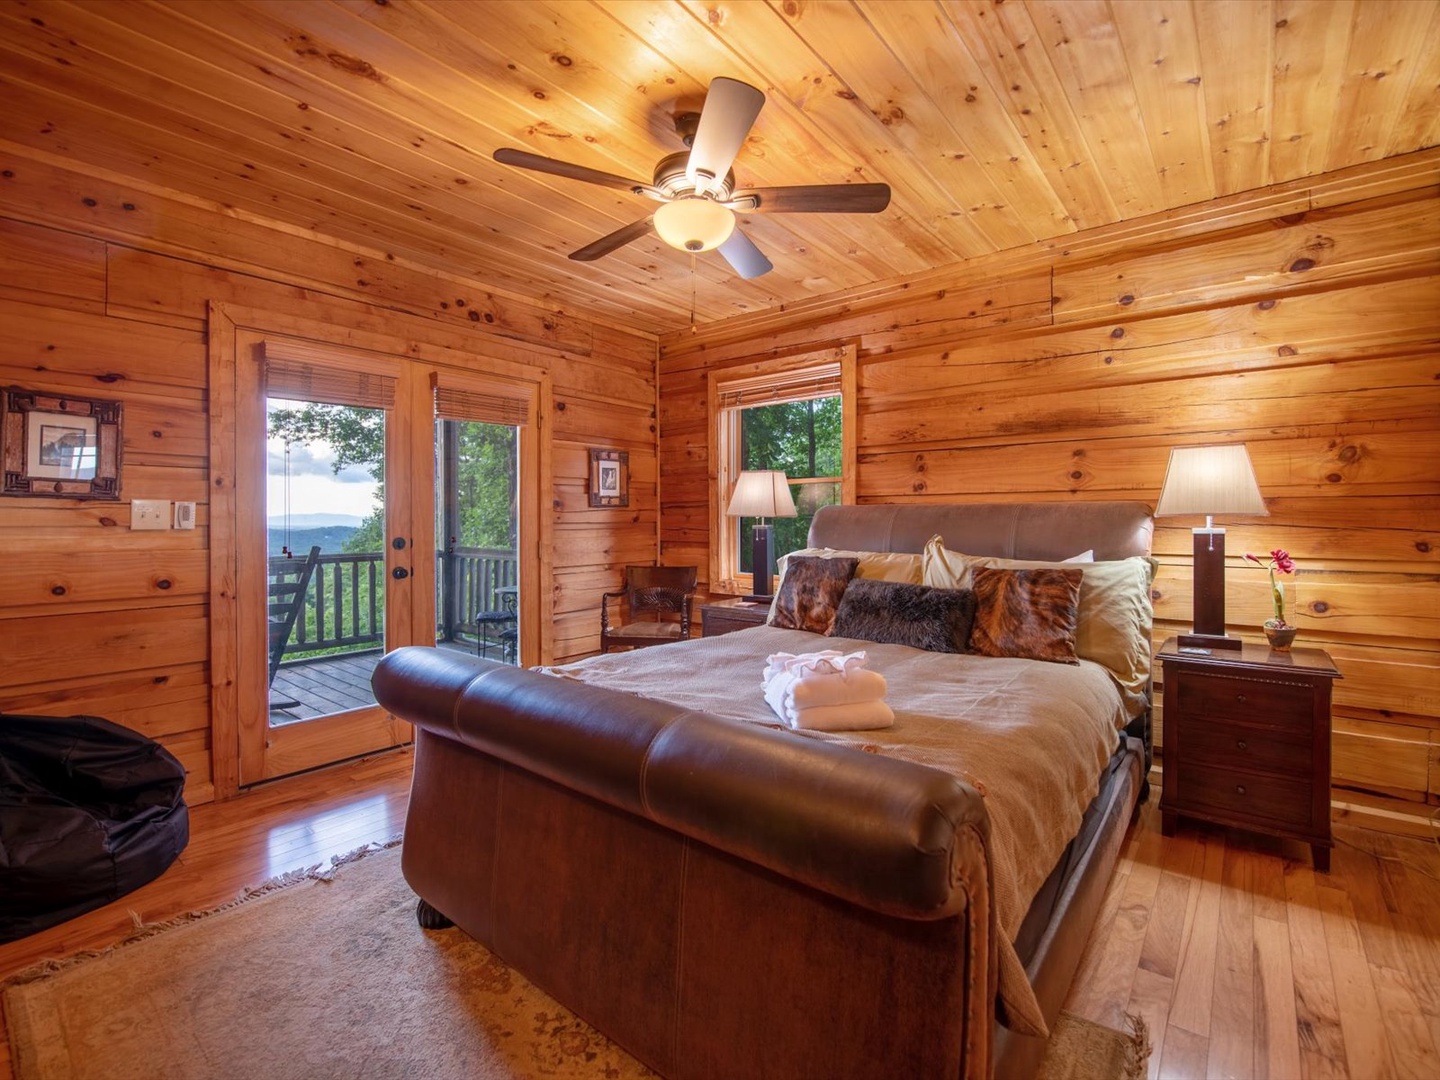 Aska Bliss- Entry level bedroom with a deck access